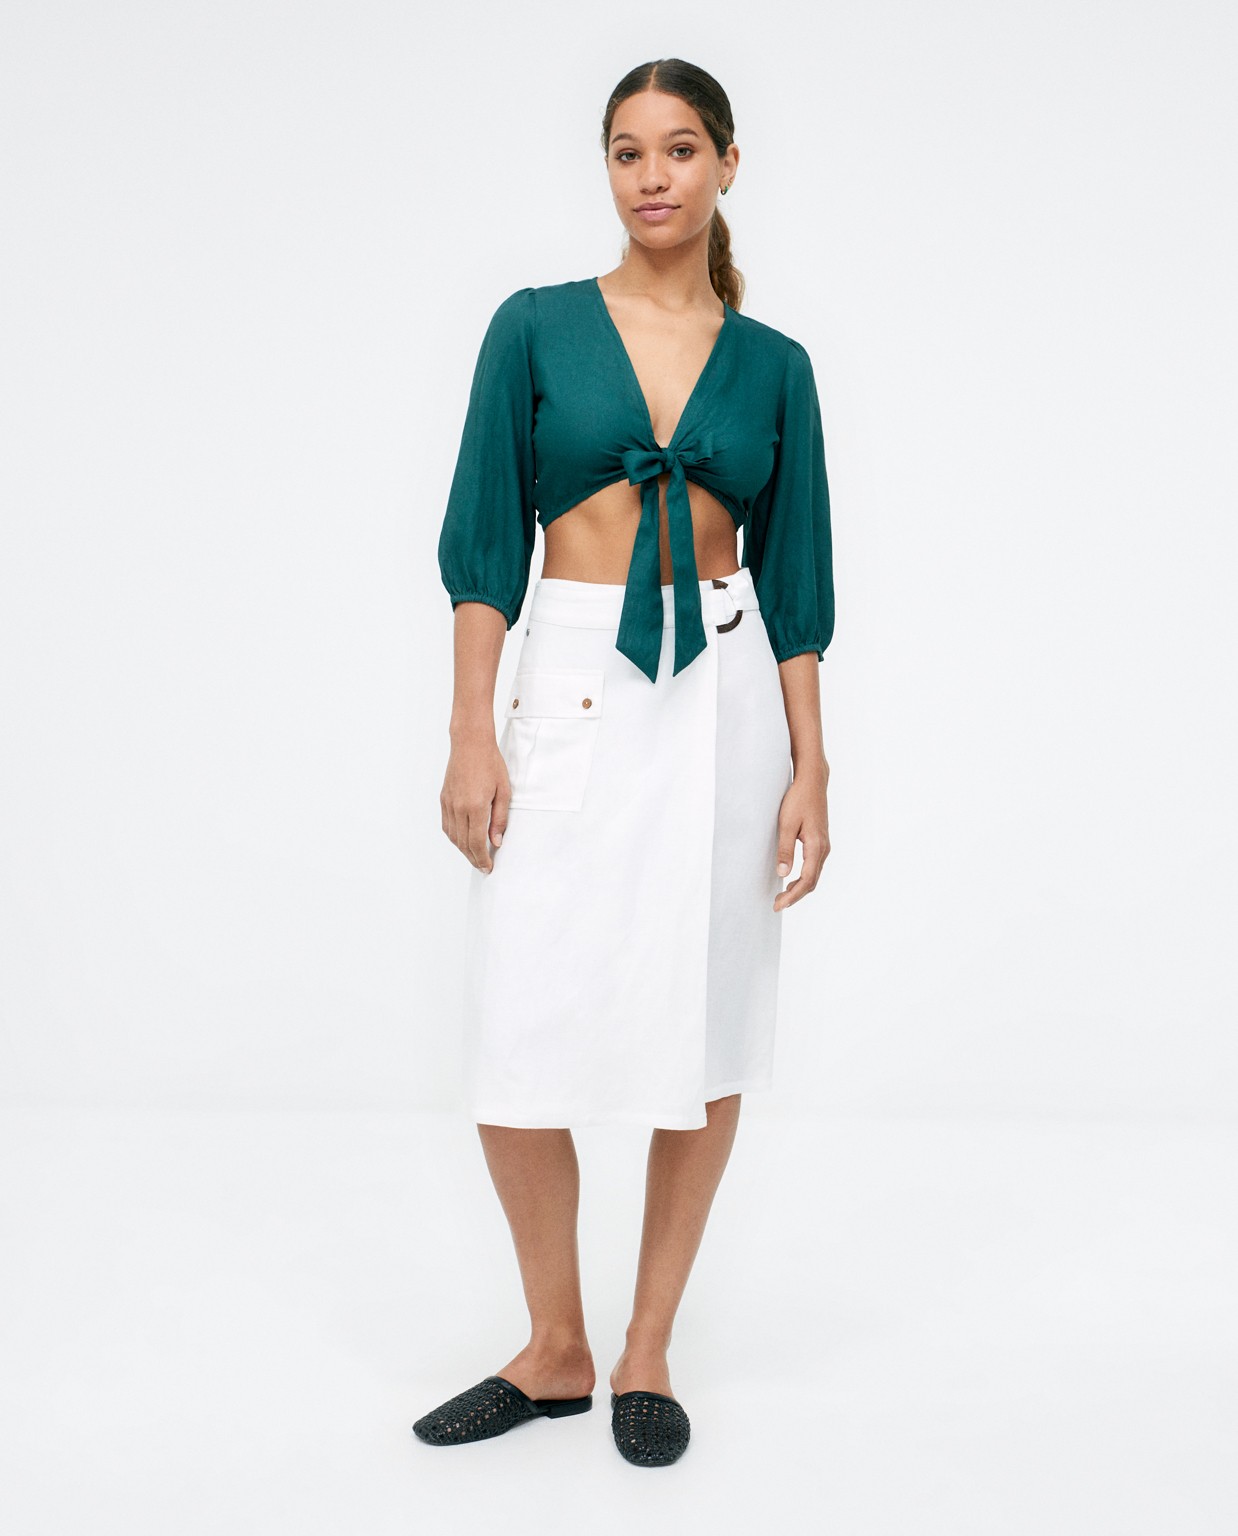 Pareo skirt with side pocket. White